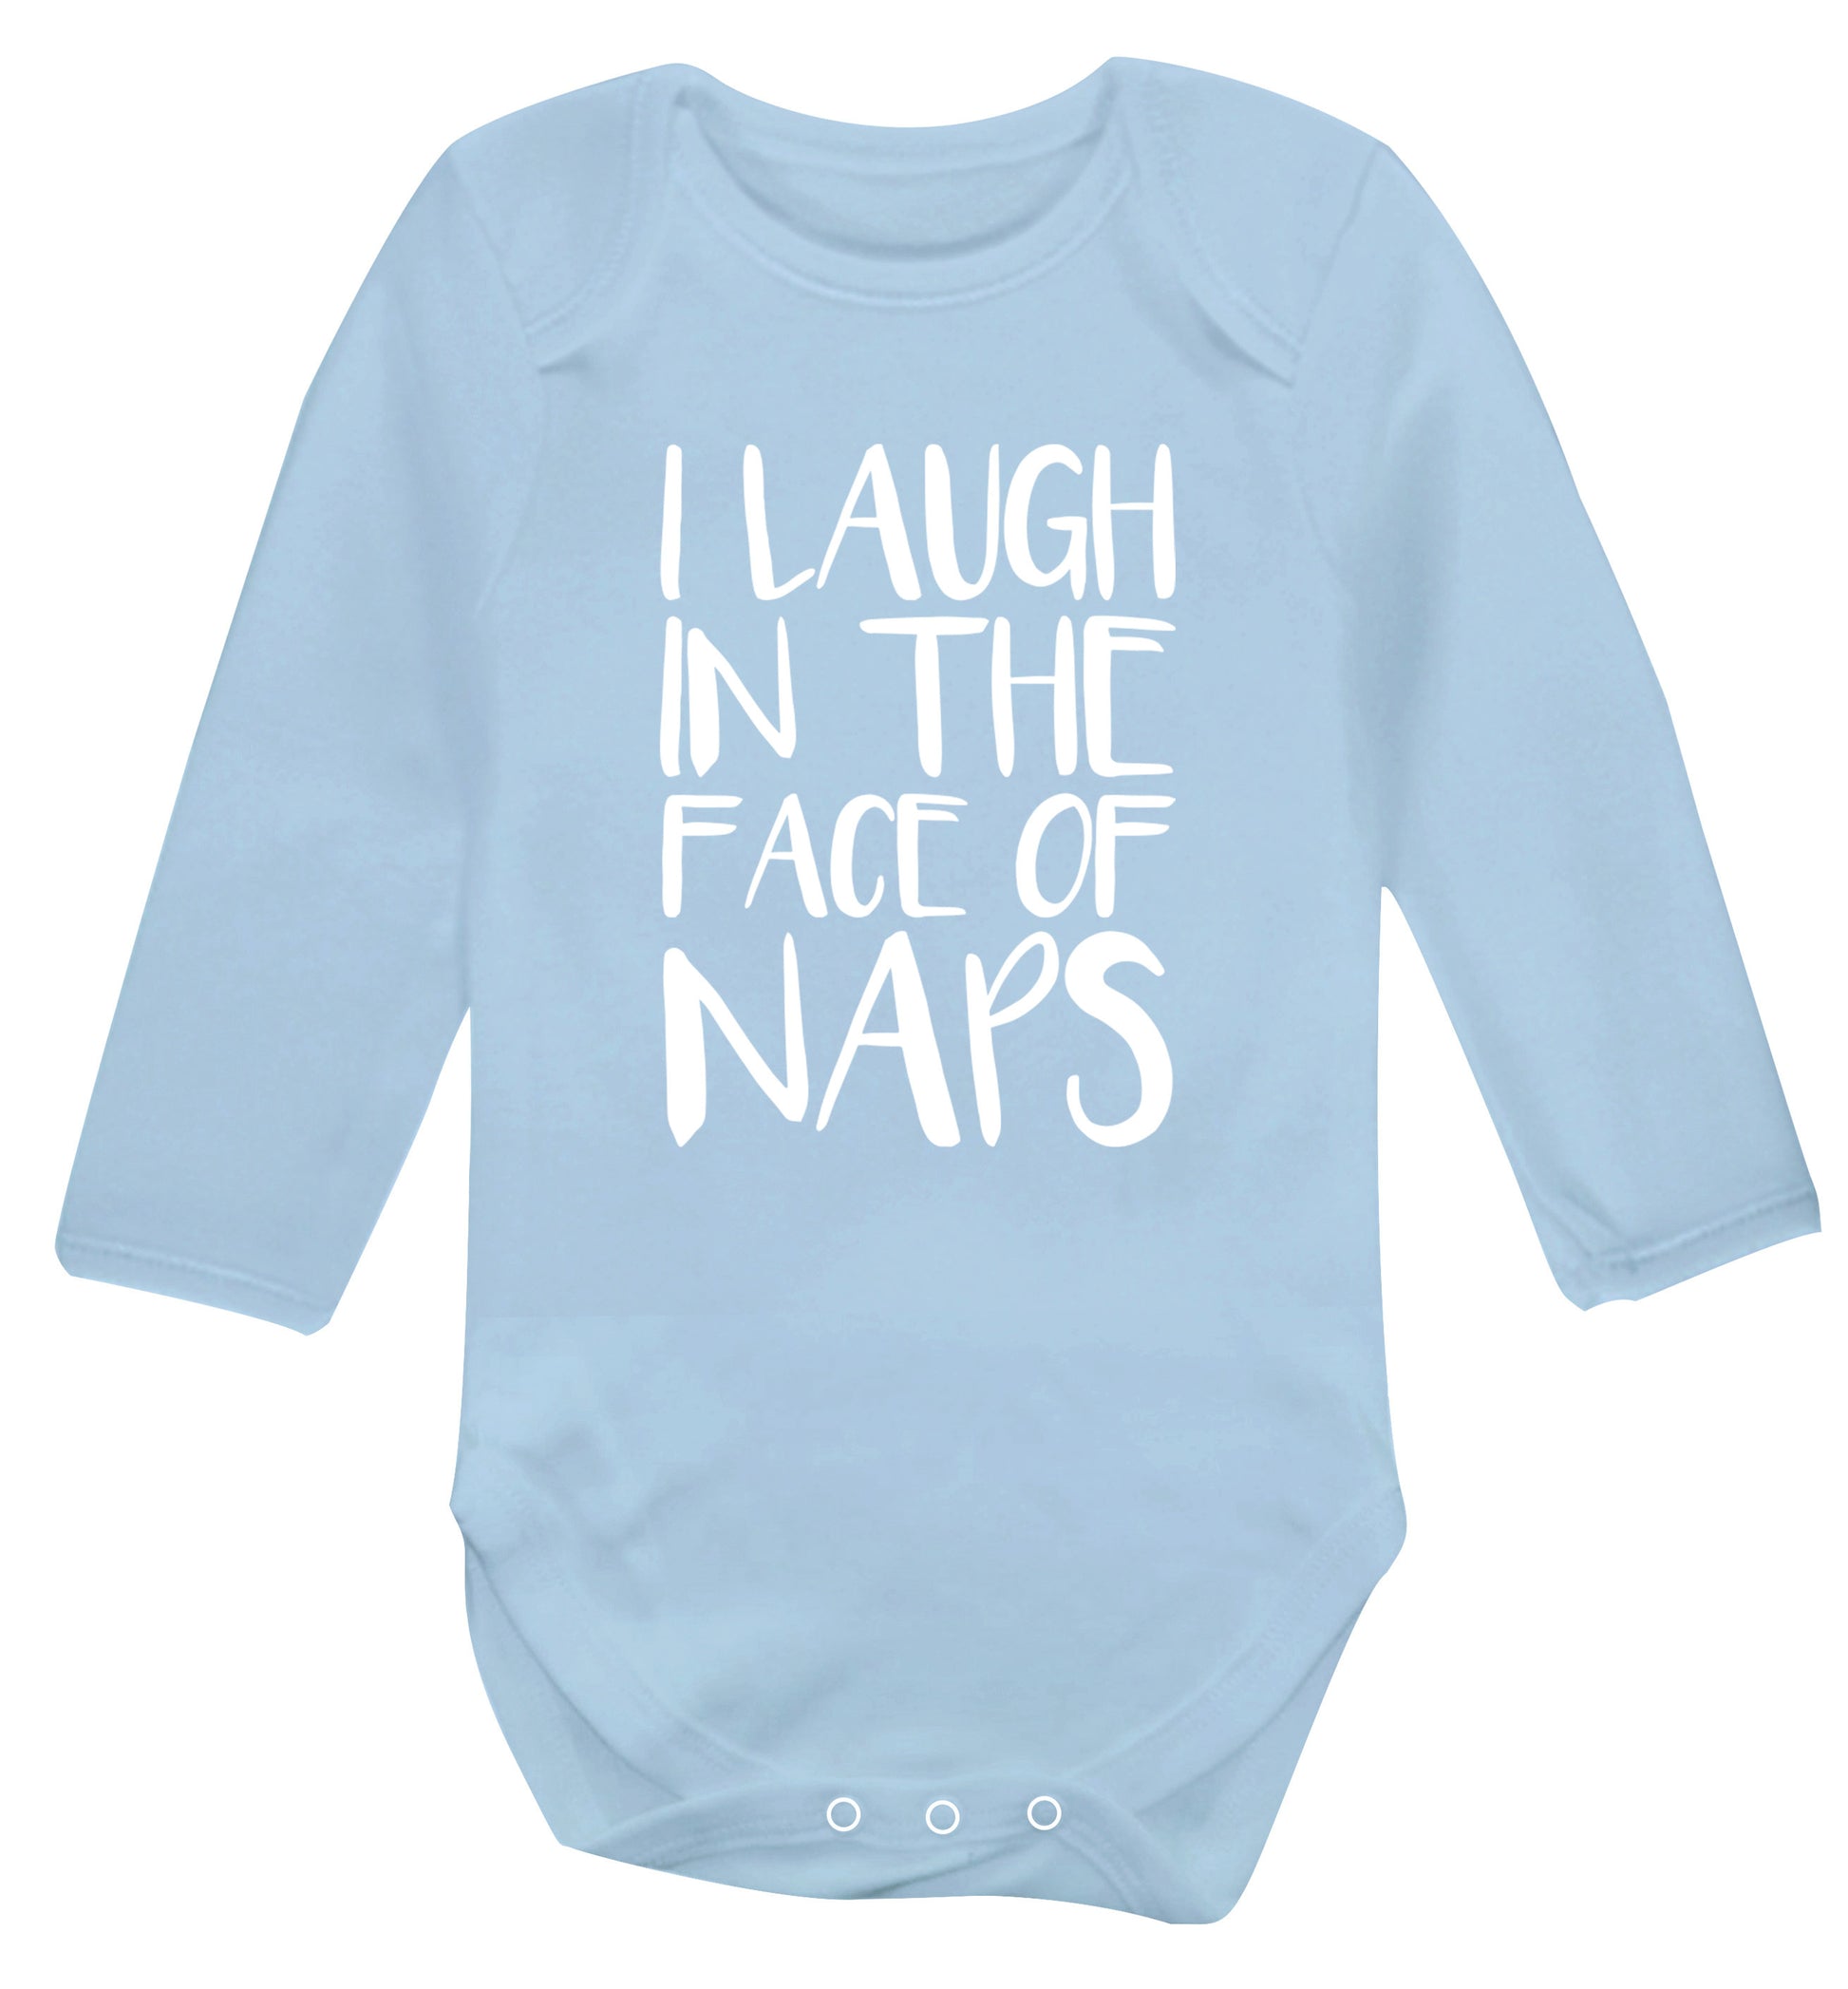 I laugh in the face of naps Baby Vest long sleeved pale blue 6-12 months